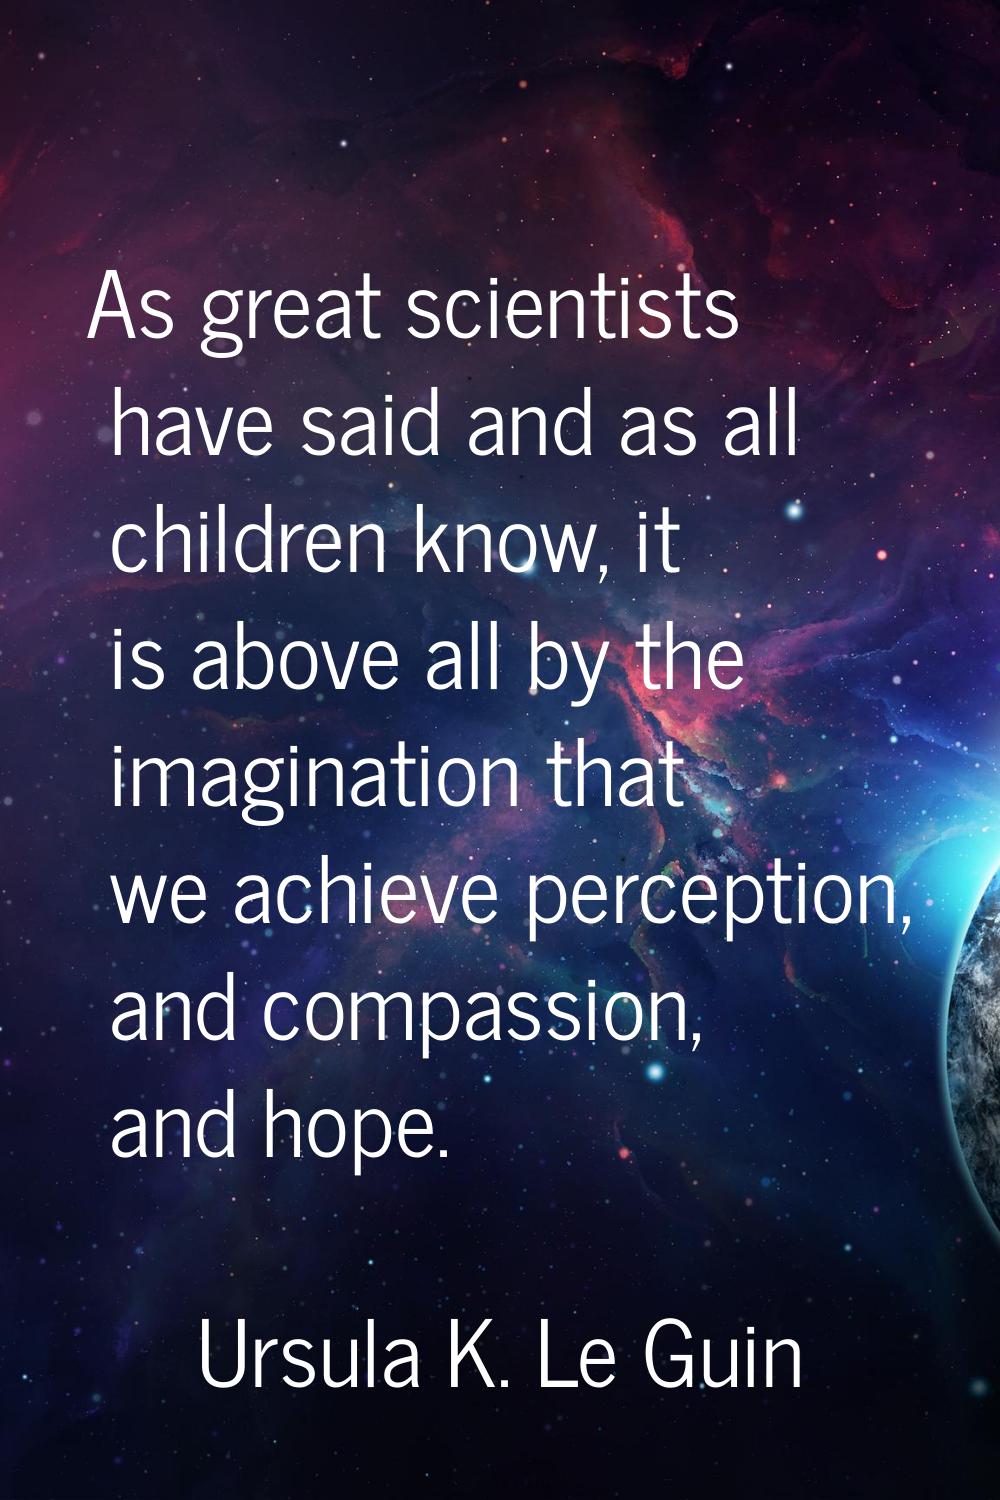 As great scientists have said and as all children know, it is above all by the imagination that we 